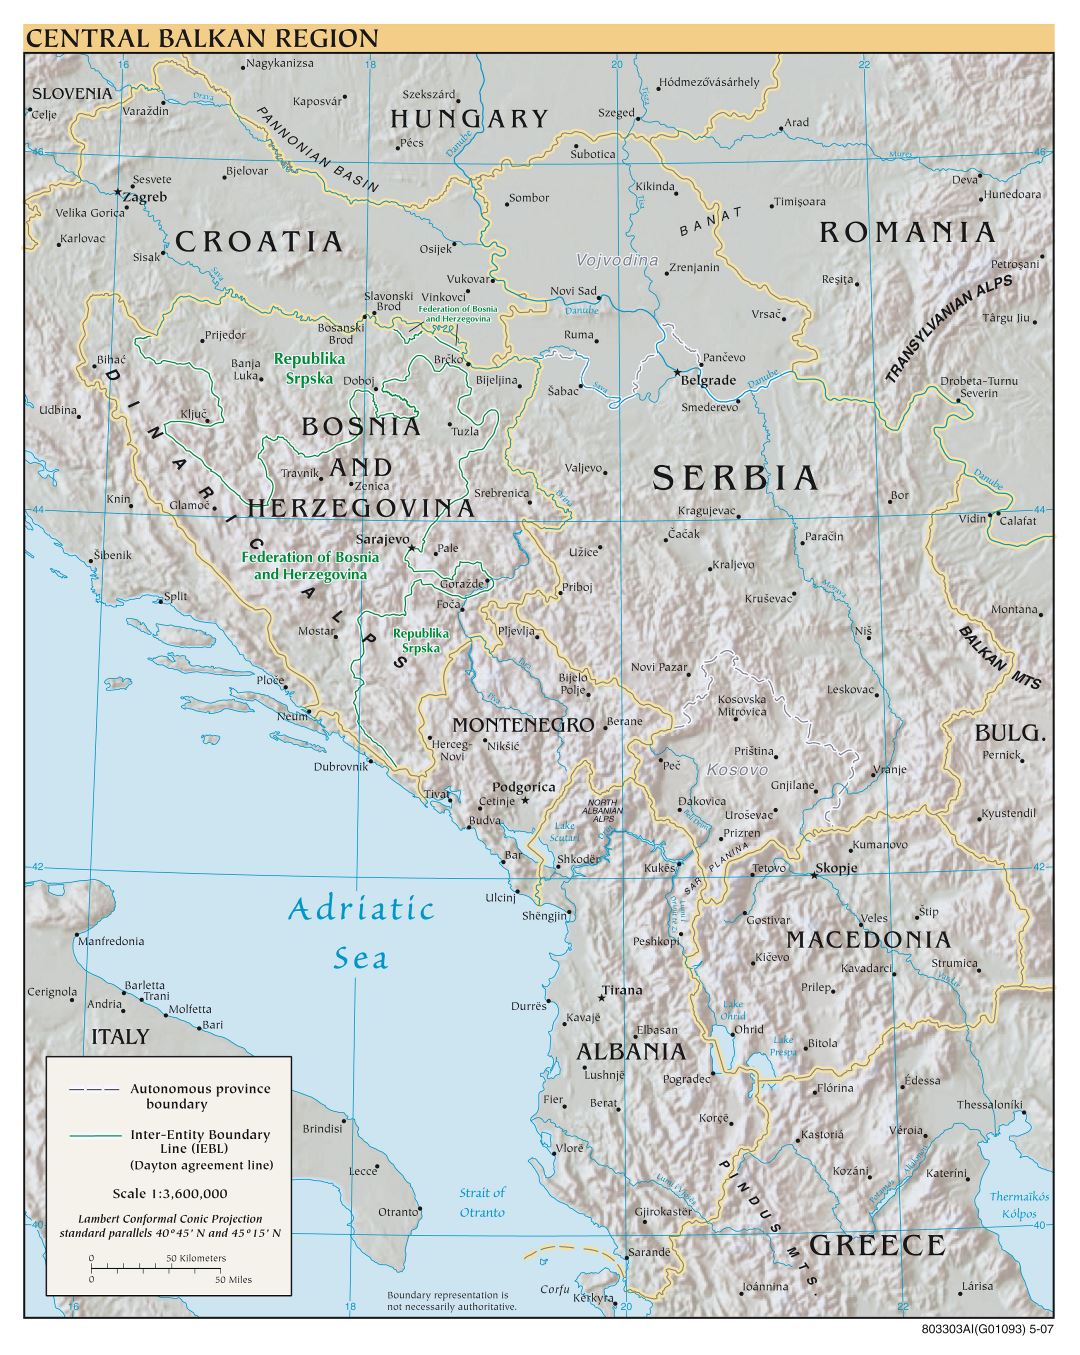 Large scale political map of Central Balkan Region with relief and major cities - 2007